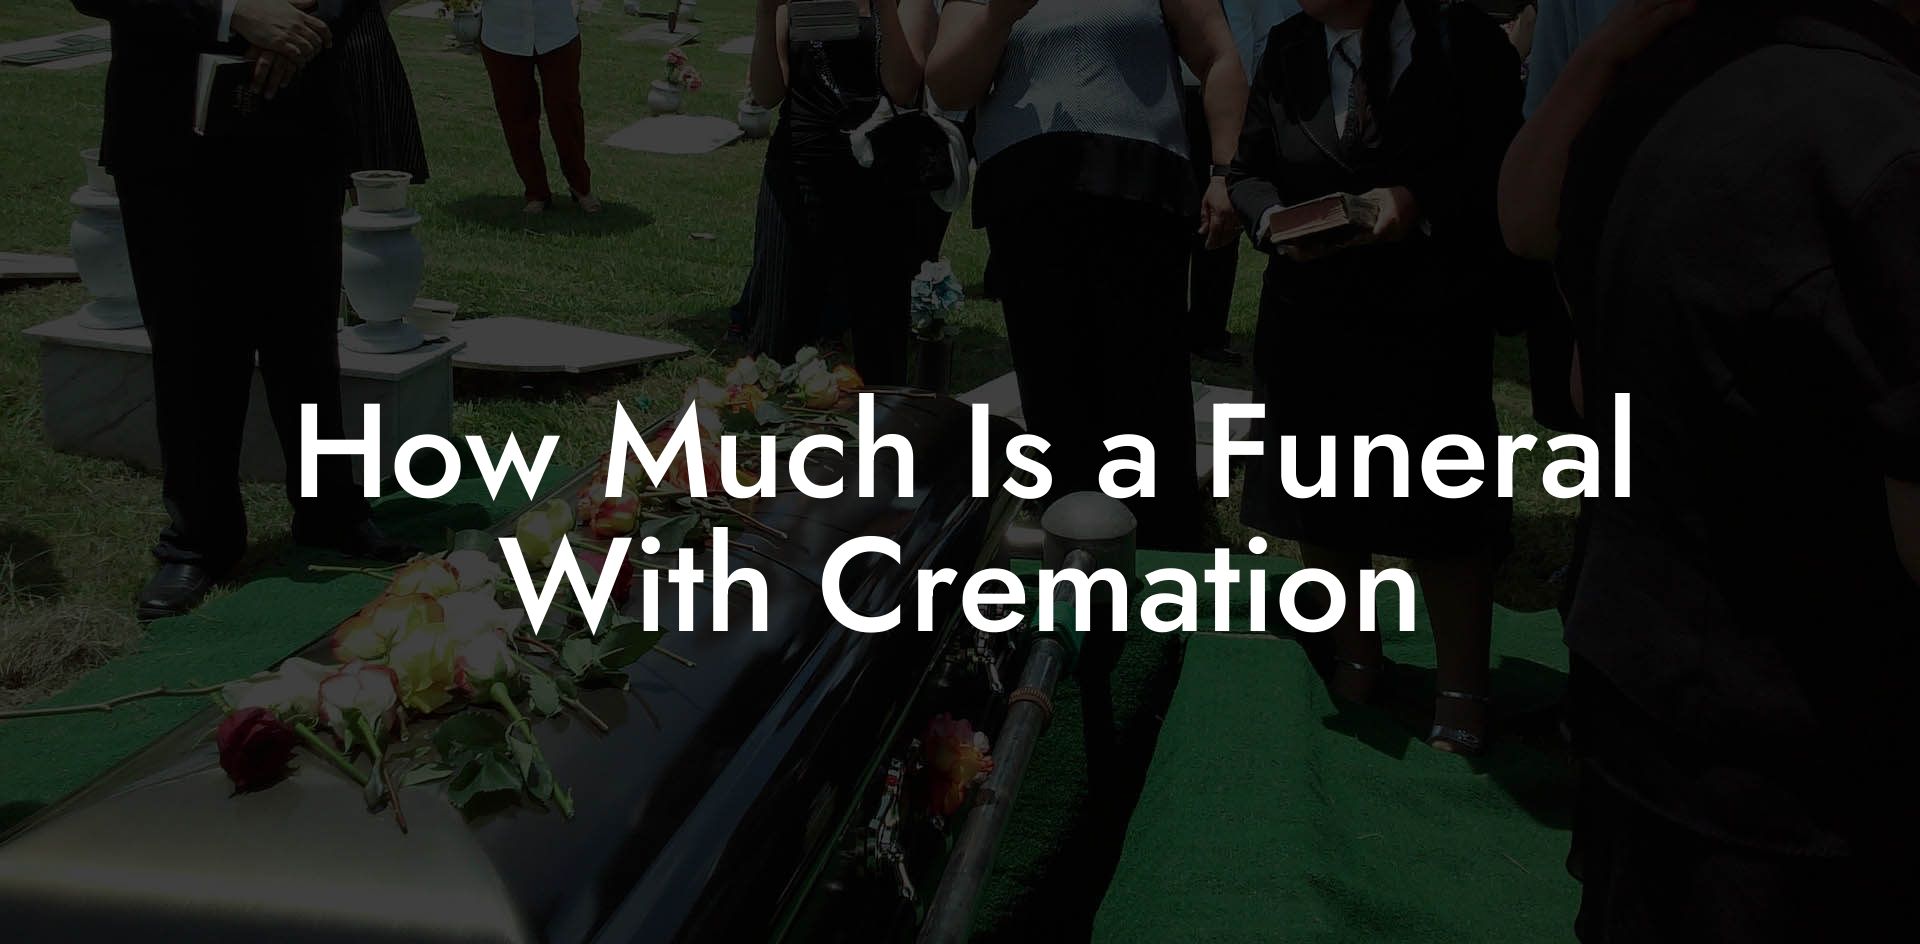 How Much Is a Funeral With Cremation